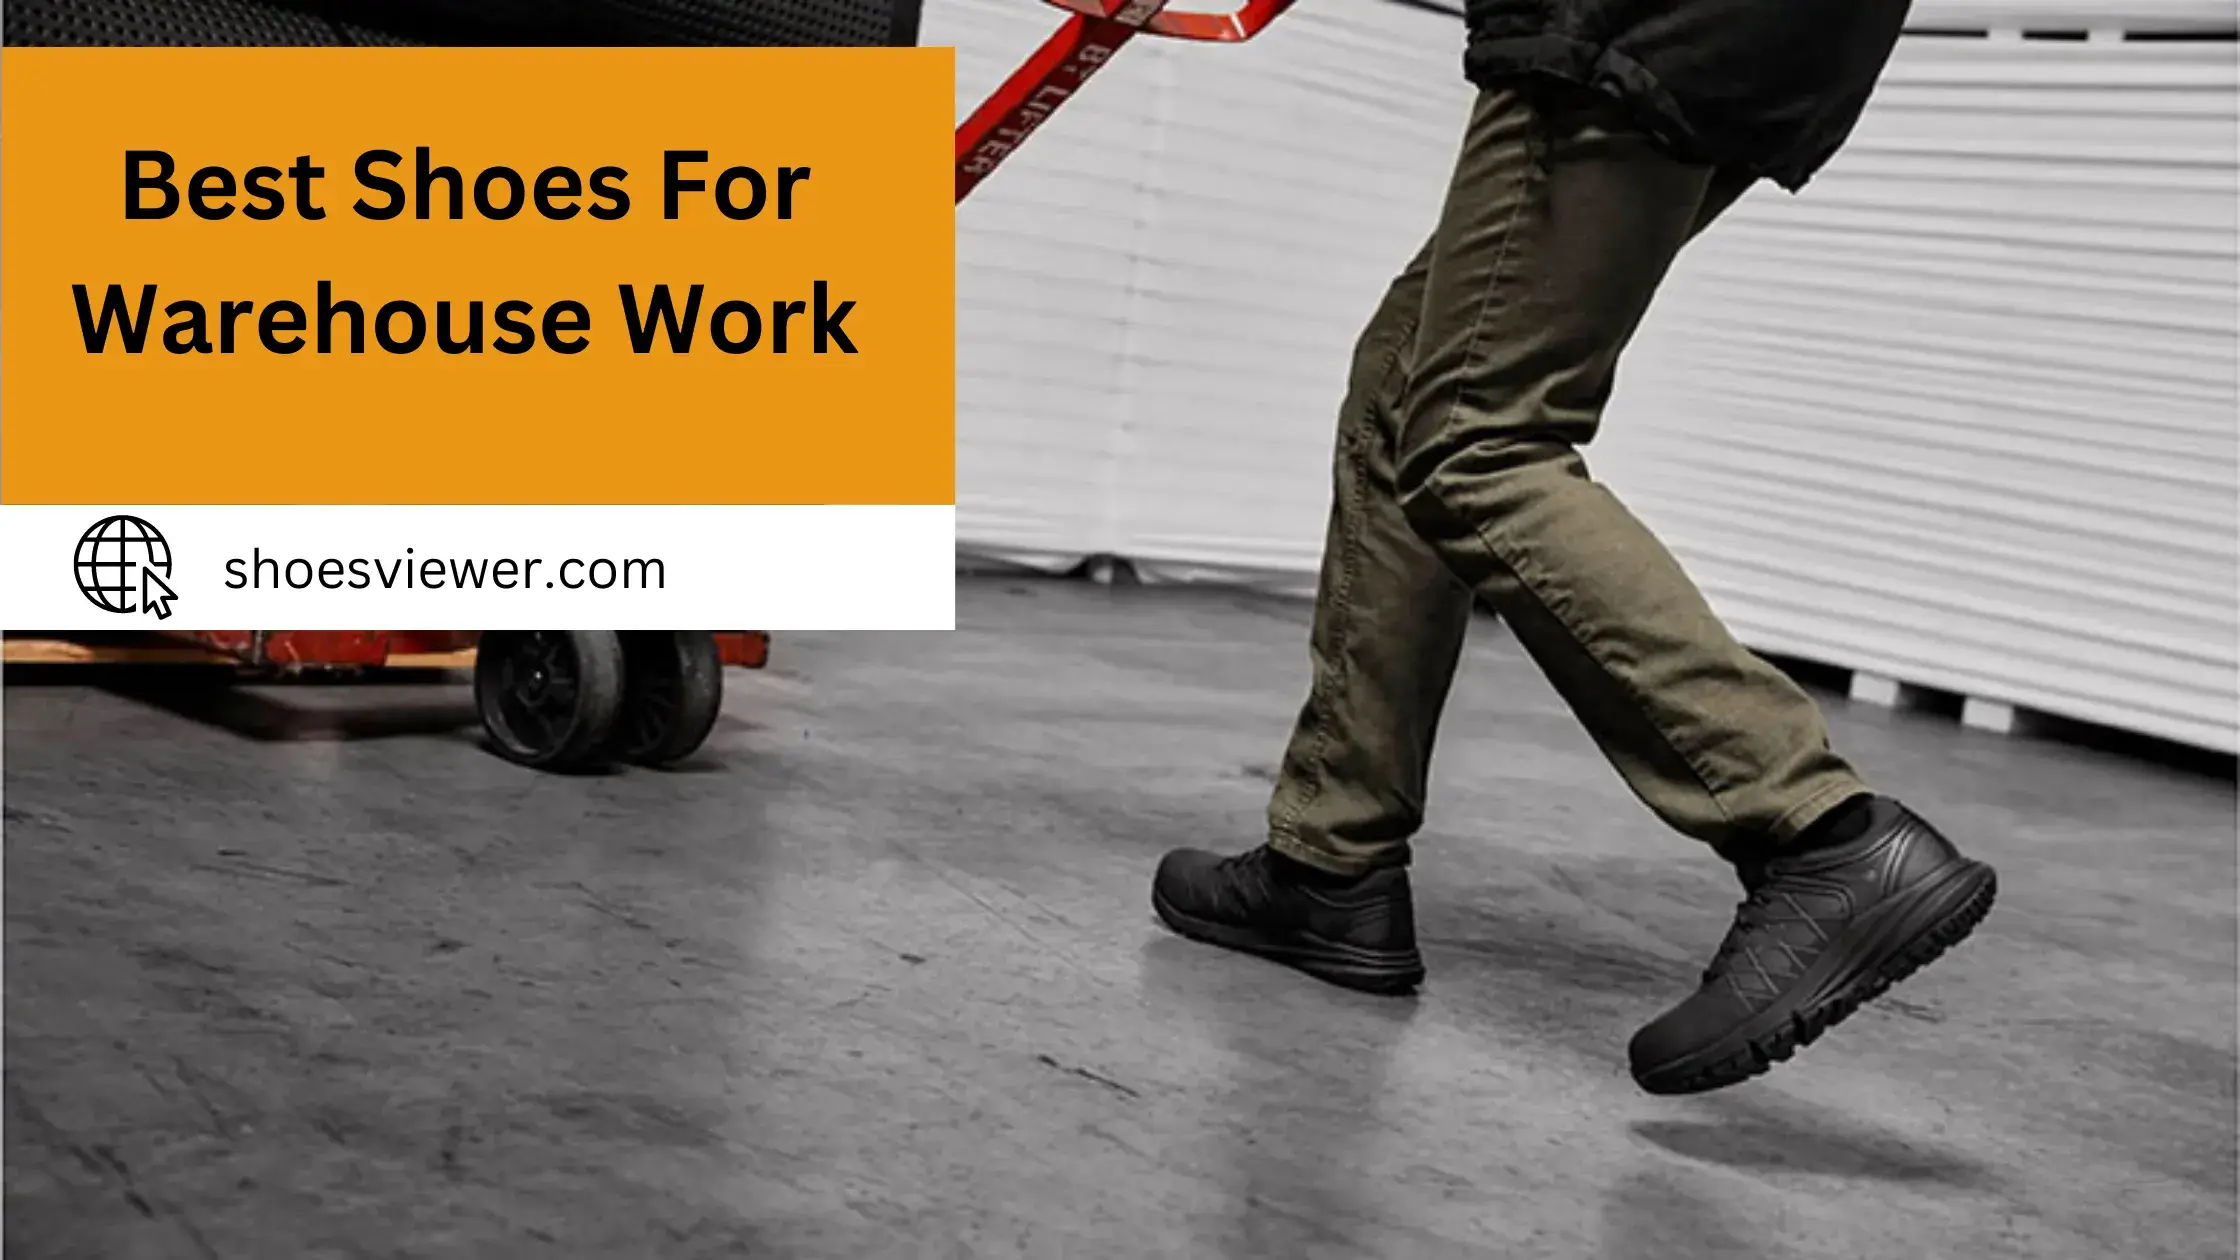 Best Shoes For Warehouse Work - (An In-Depth Guide)